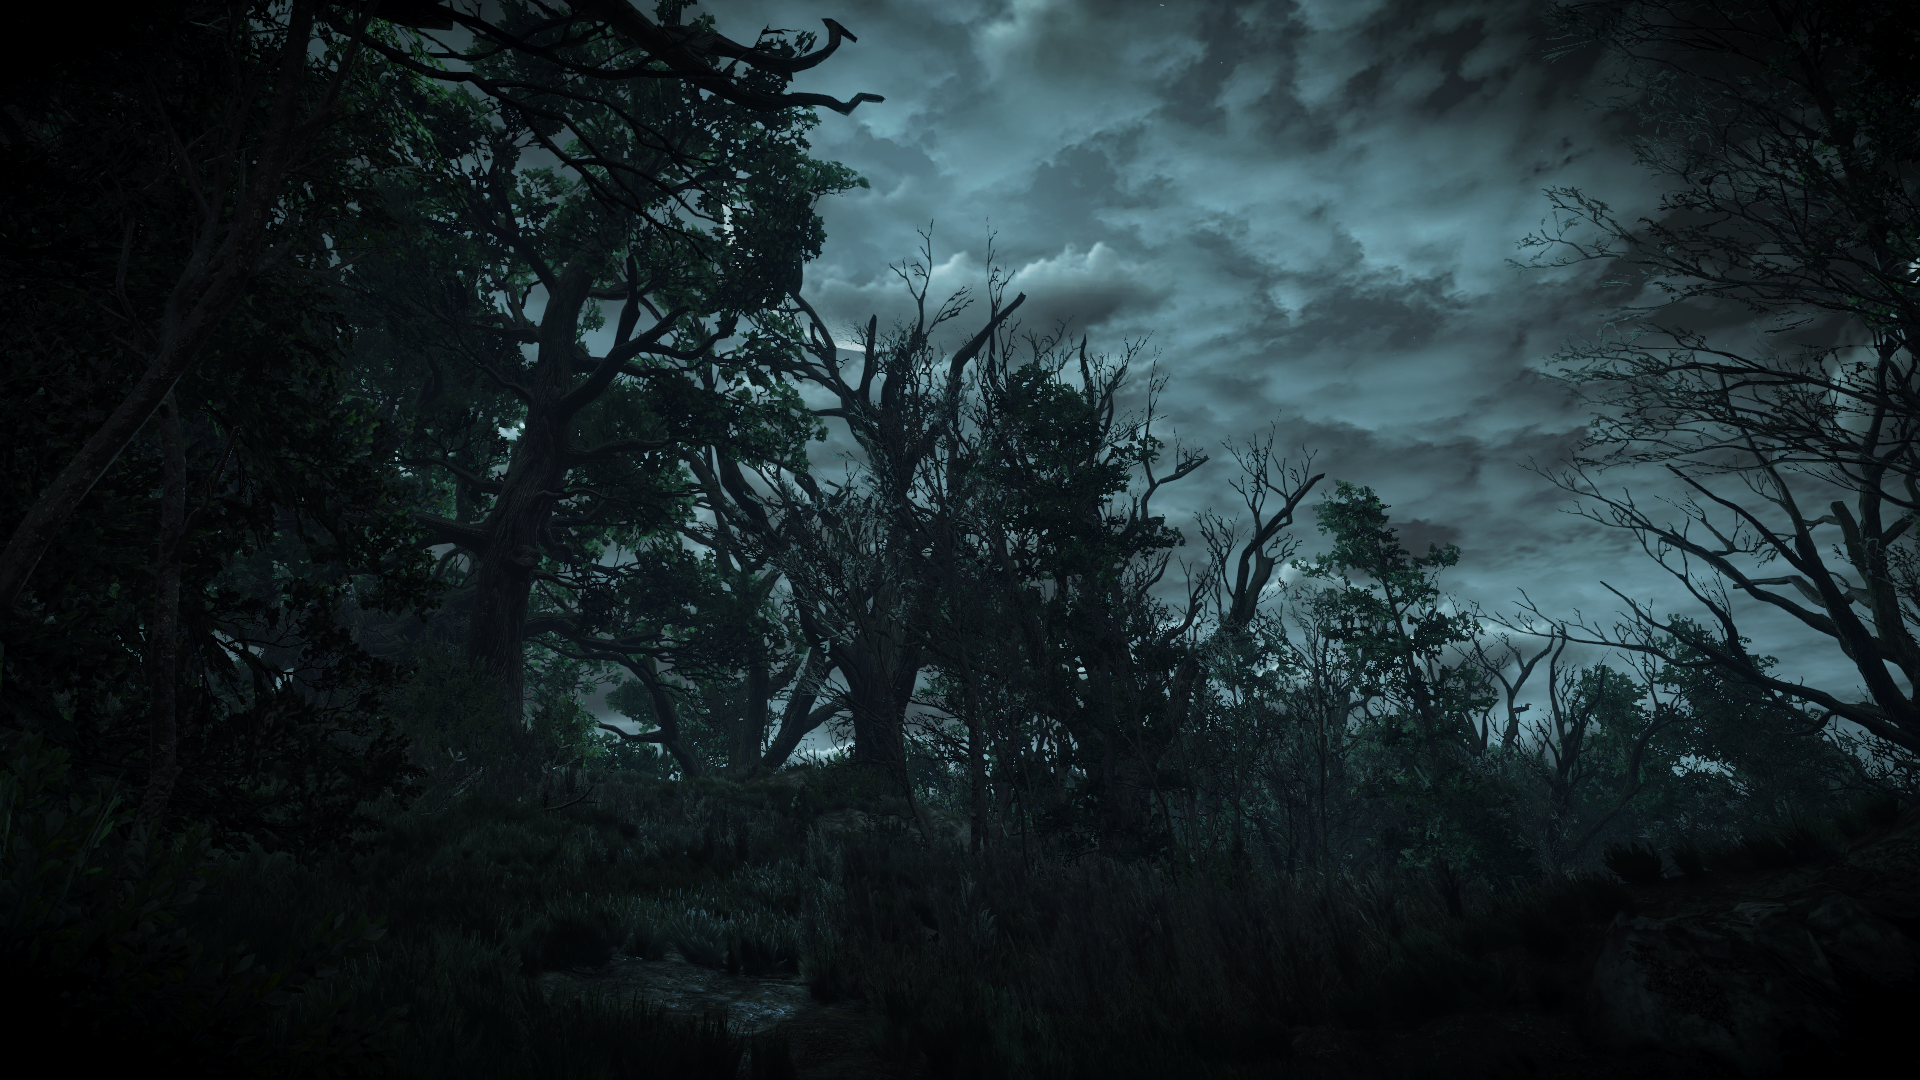 General 1920x1080 The Witcher 3: Wild Hunt video games forest night PC gaming video game landscape screen shot